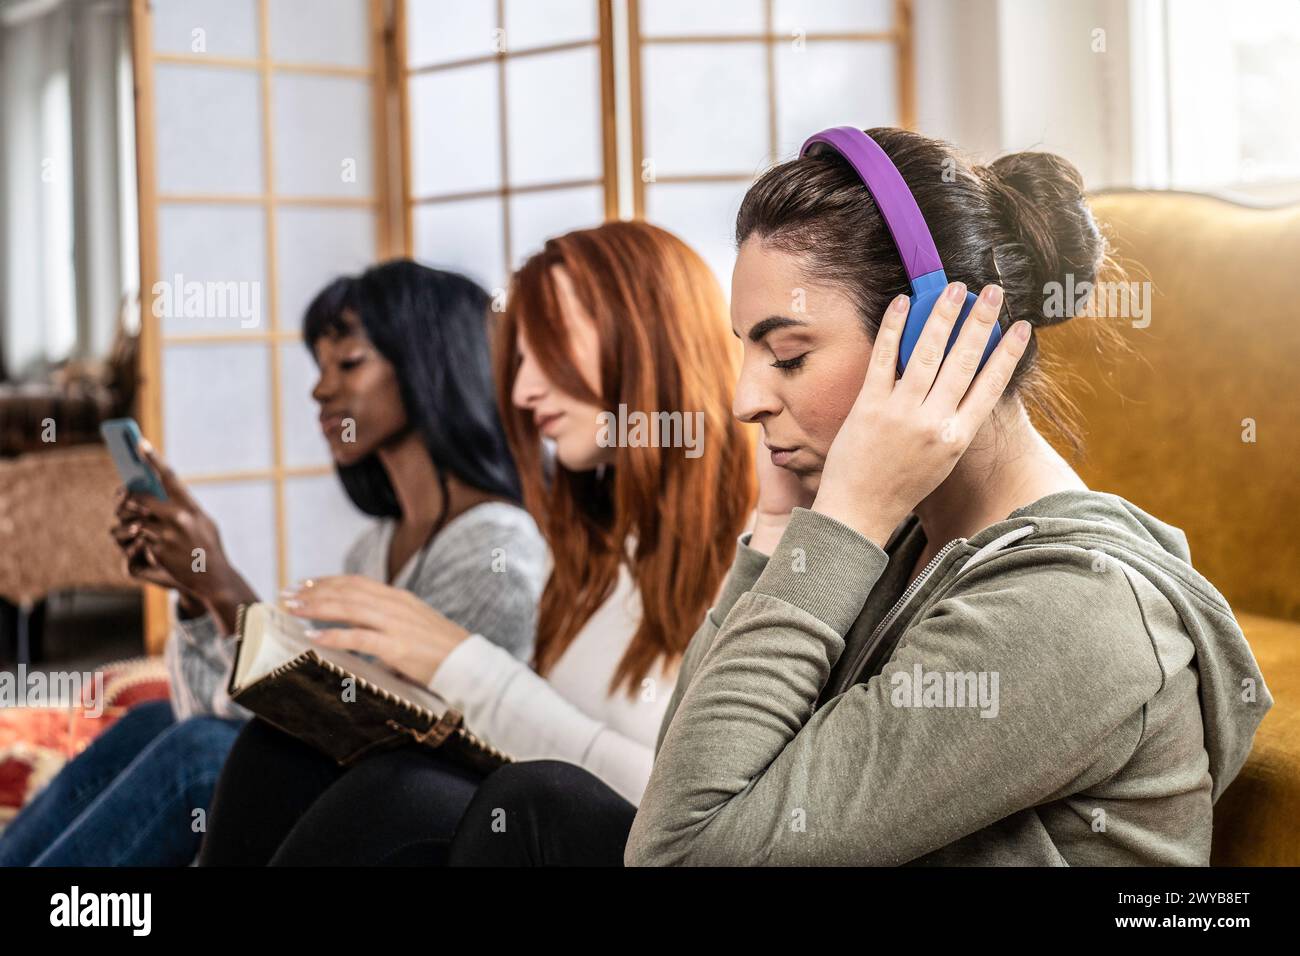 Women friends connected yet independent. A vibrant depiction of millennial and generation Z leisure in a tech-savvy world. Stock Photo